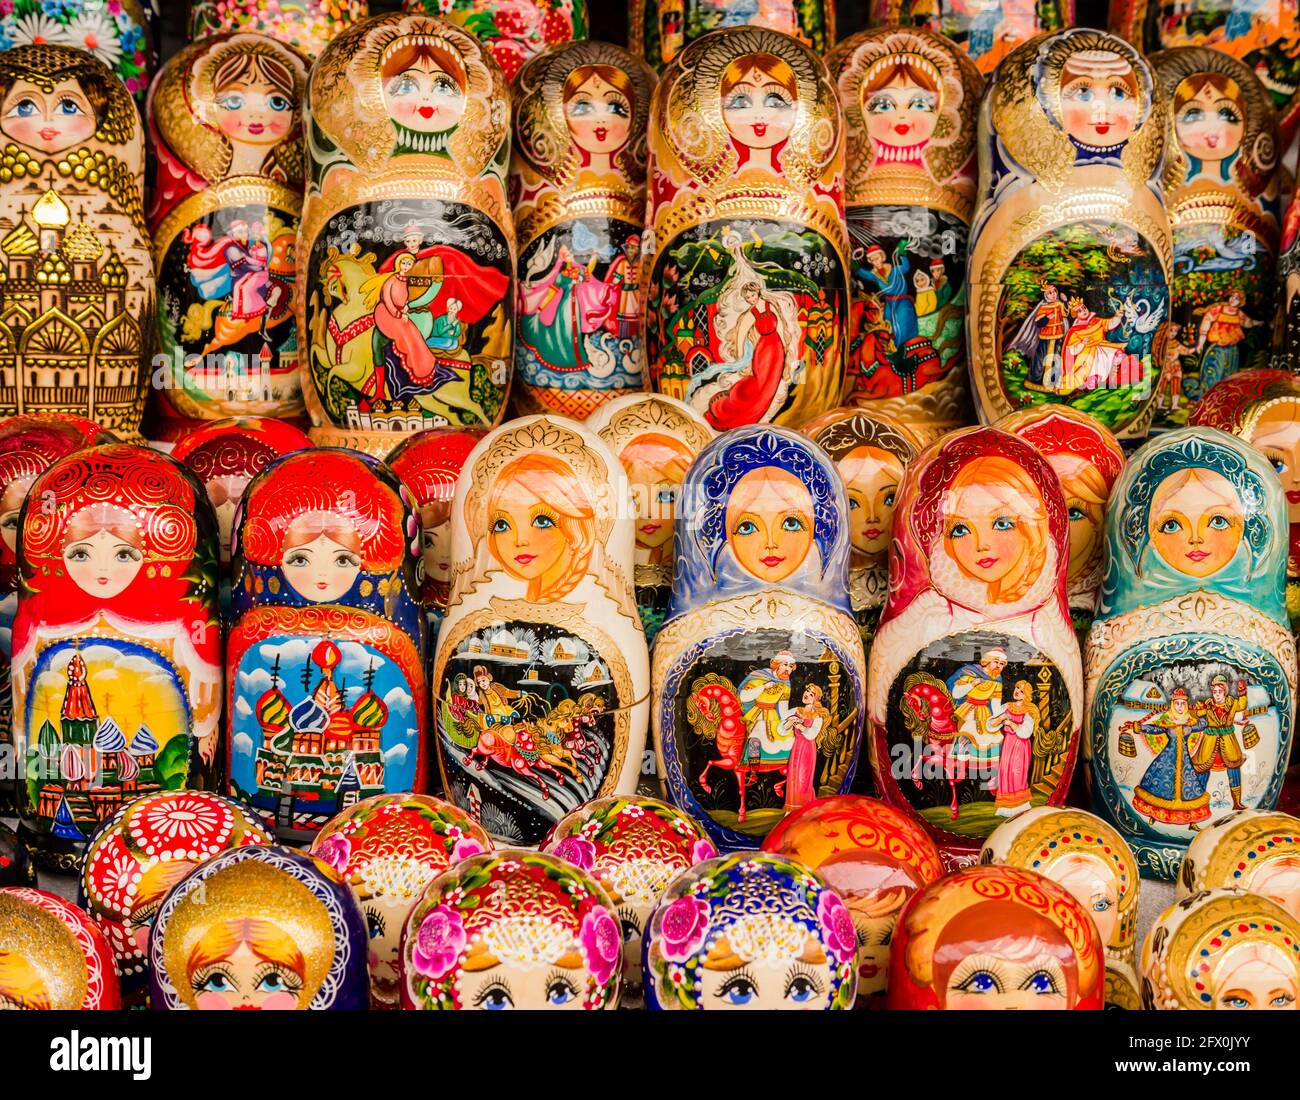 Row of colorful traditional matryoshka dolls, Moscow, Russia Stock Photo